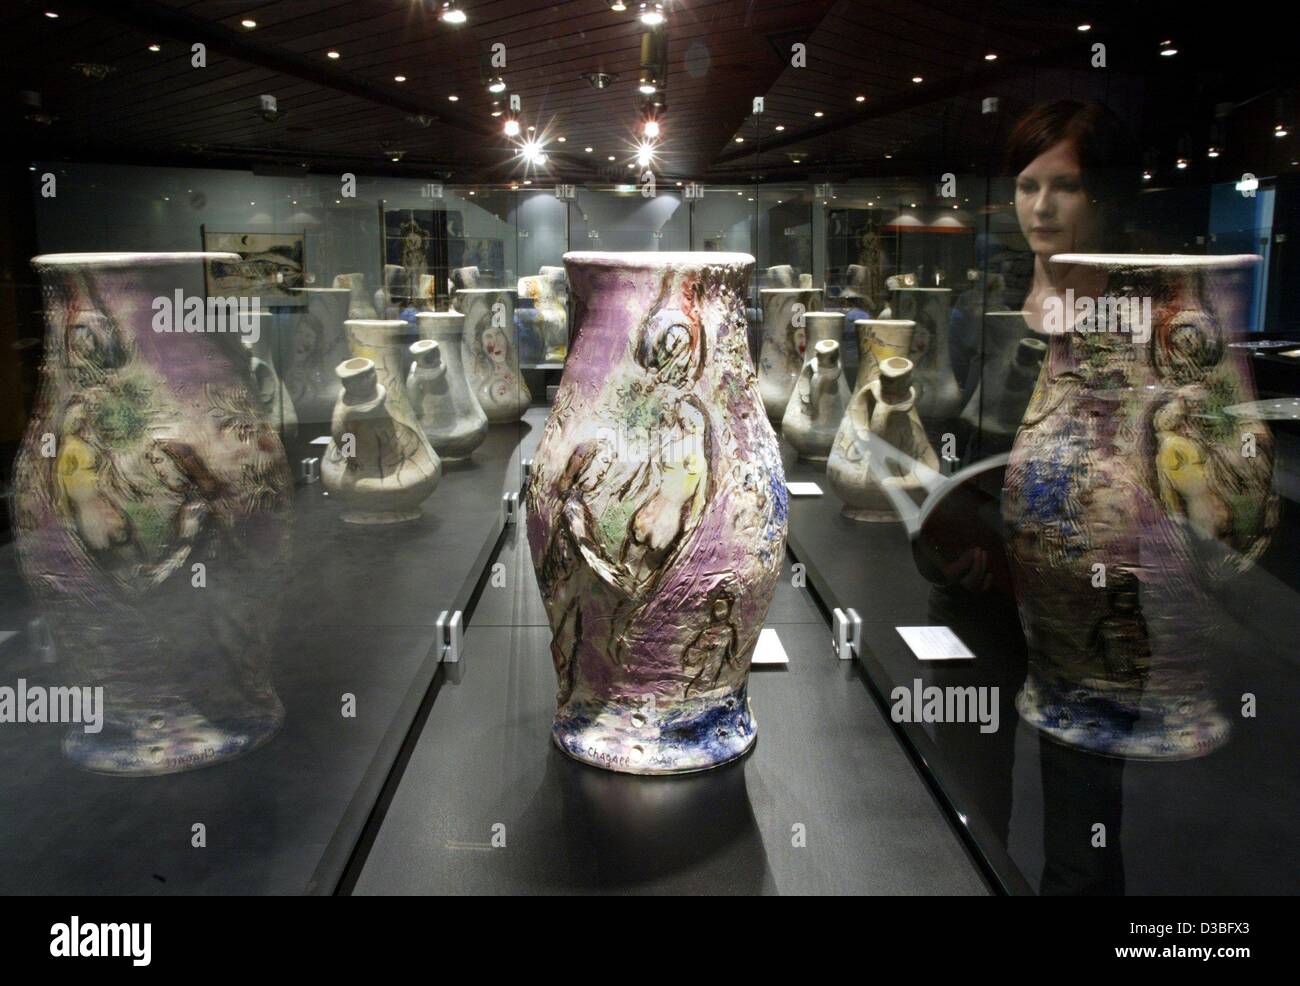 (dpa) - A chagall vase is reflected in the display case as well as a female visitor of the Chagall exhibition in Balingen, Germany, 18 June 2003. About 100 pieces of pottery are presented until 28 September 2003. Stock Photo